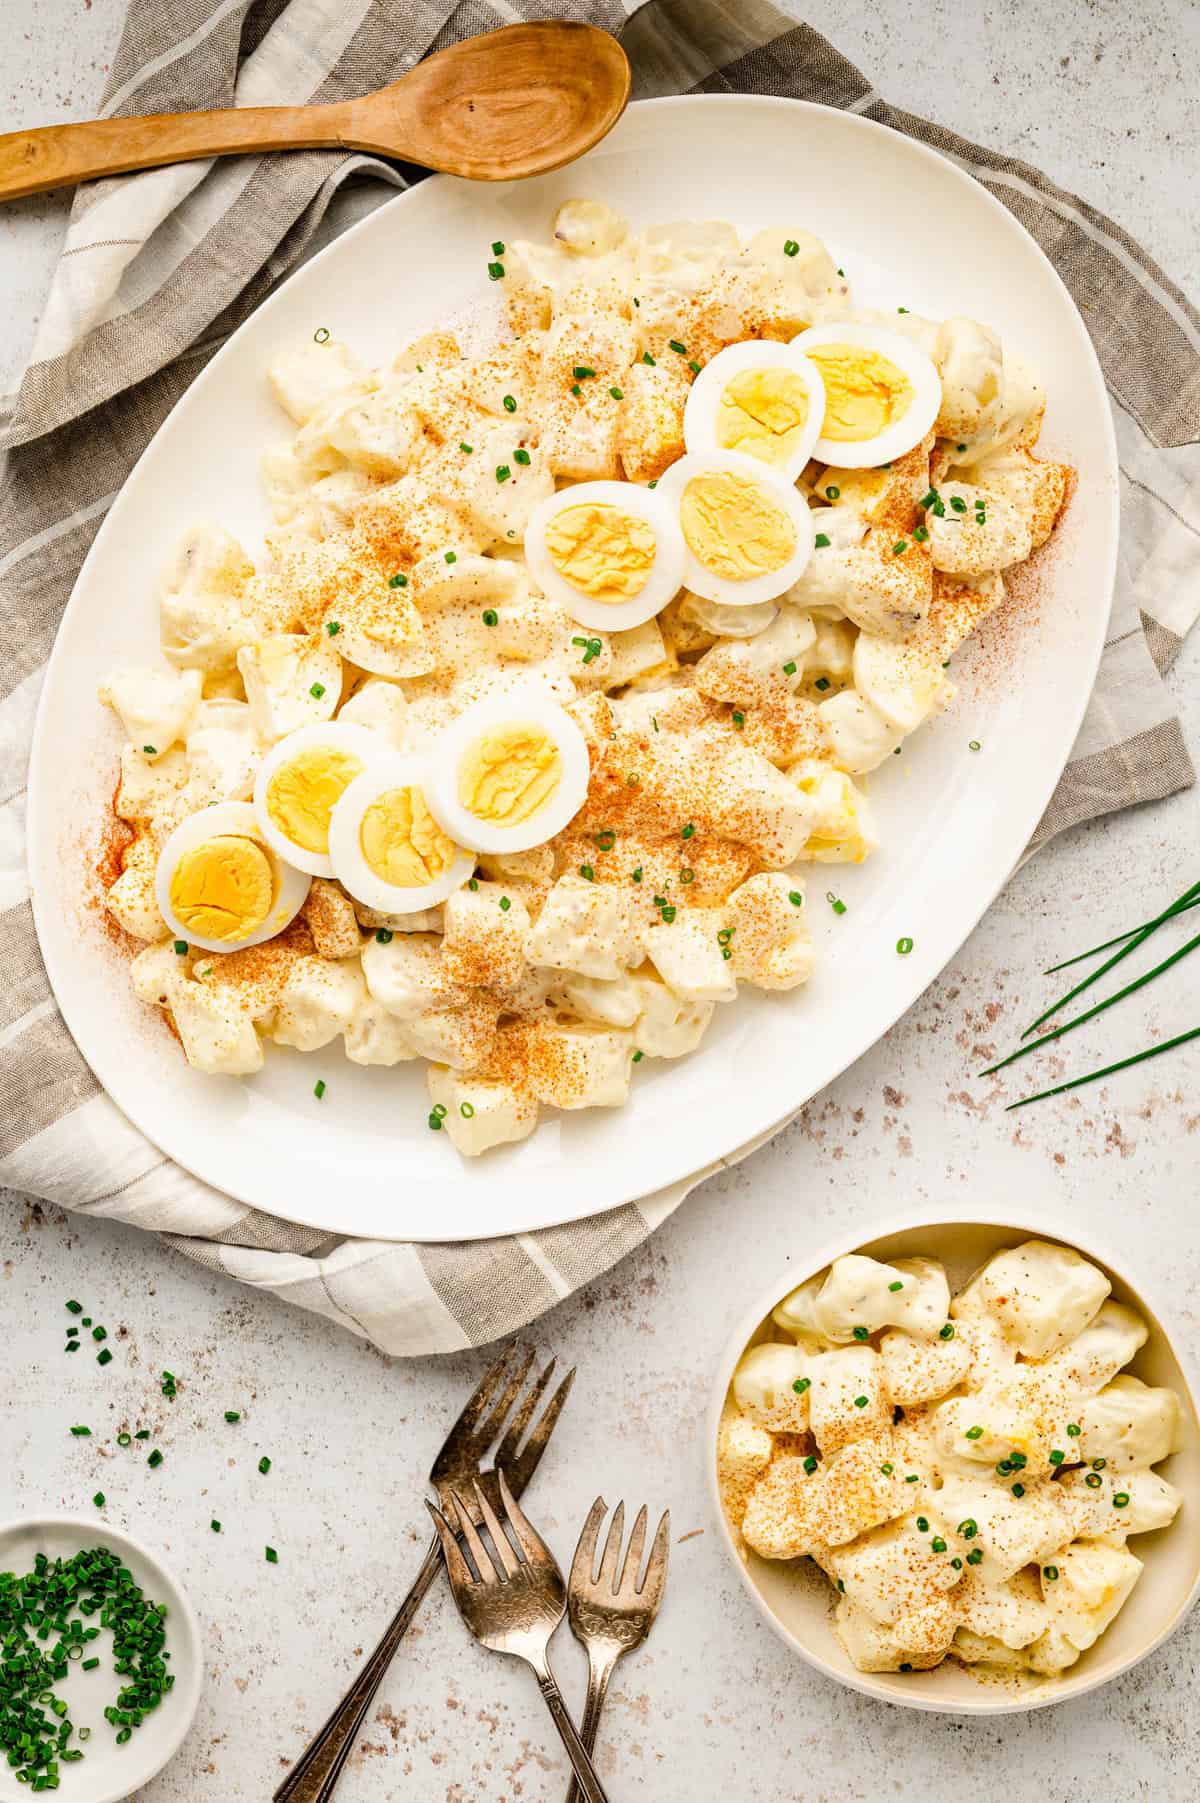 Bowl of potato salad topped with hard boiled egg slices and chives